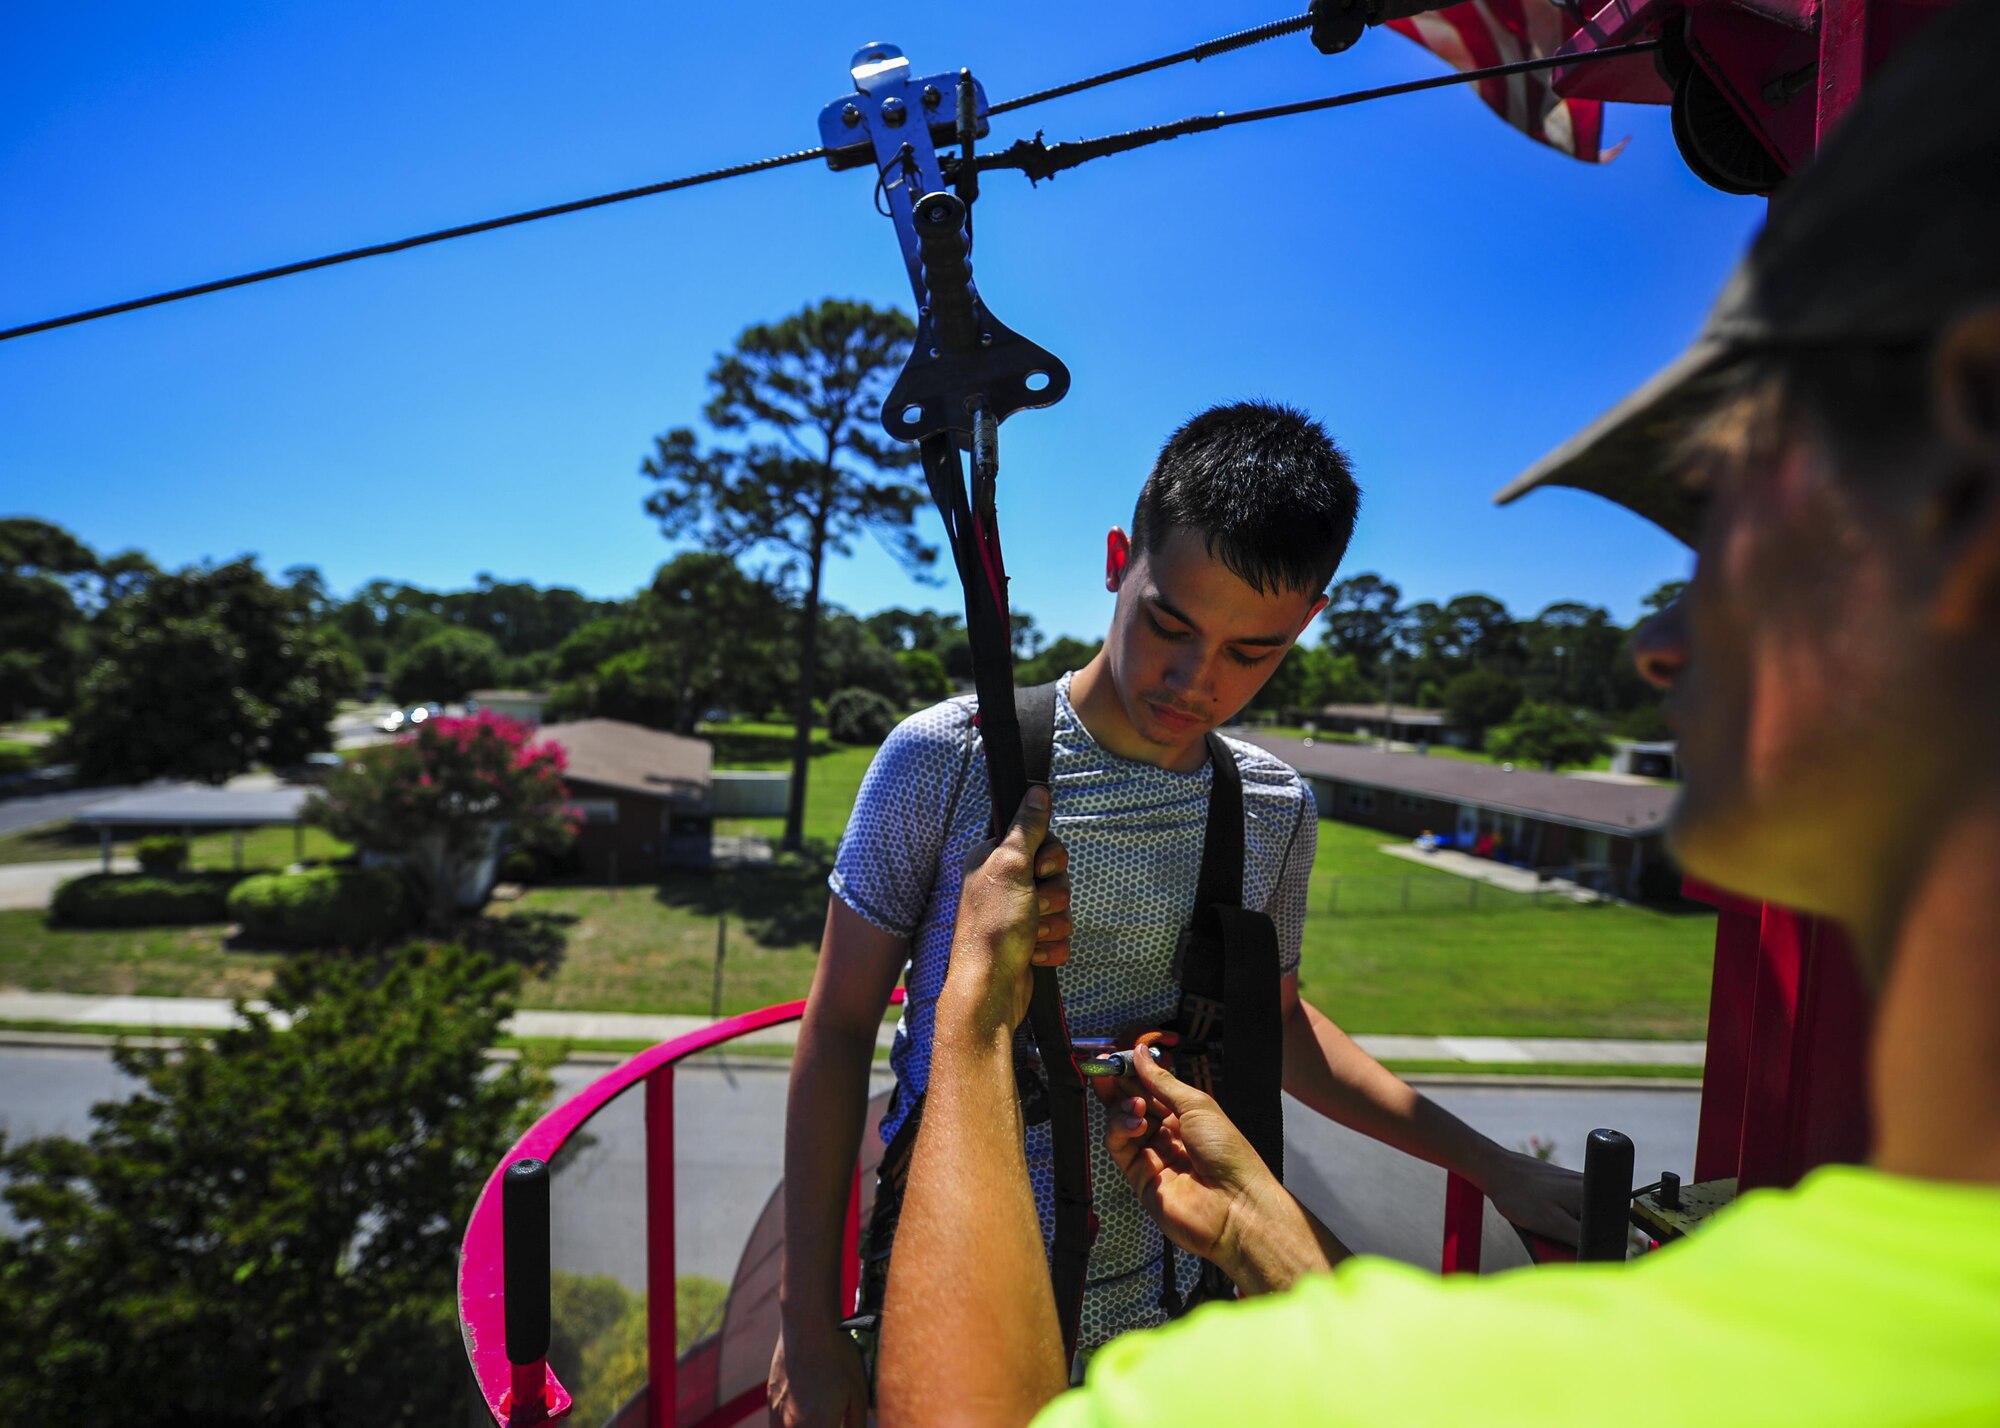 Airmen and their family members zipline as part of the Sound of Independence celebration at Hurlburt Field, Fla., June 24, 2016. The event is an annual Fourth of July celebration hosted by the 1st Special Operations Force Support Squadron. (U.S. Air Force photo by Airman 1st Class Joseph Pick)